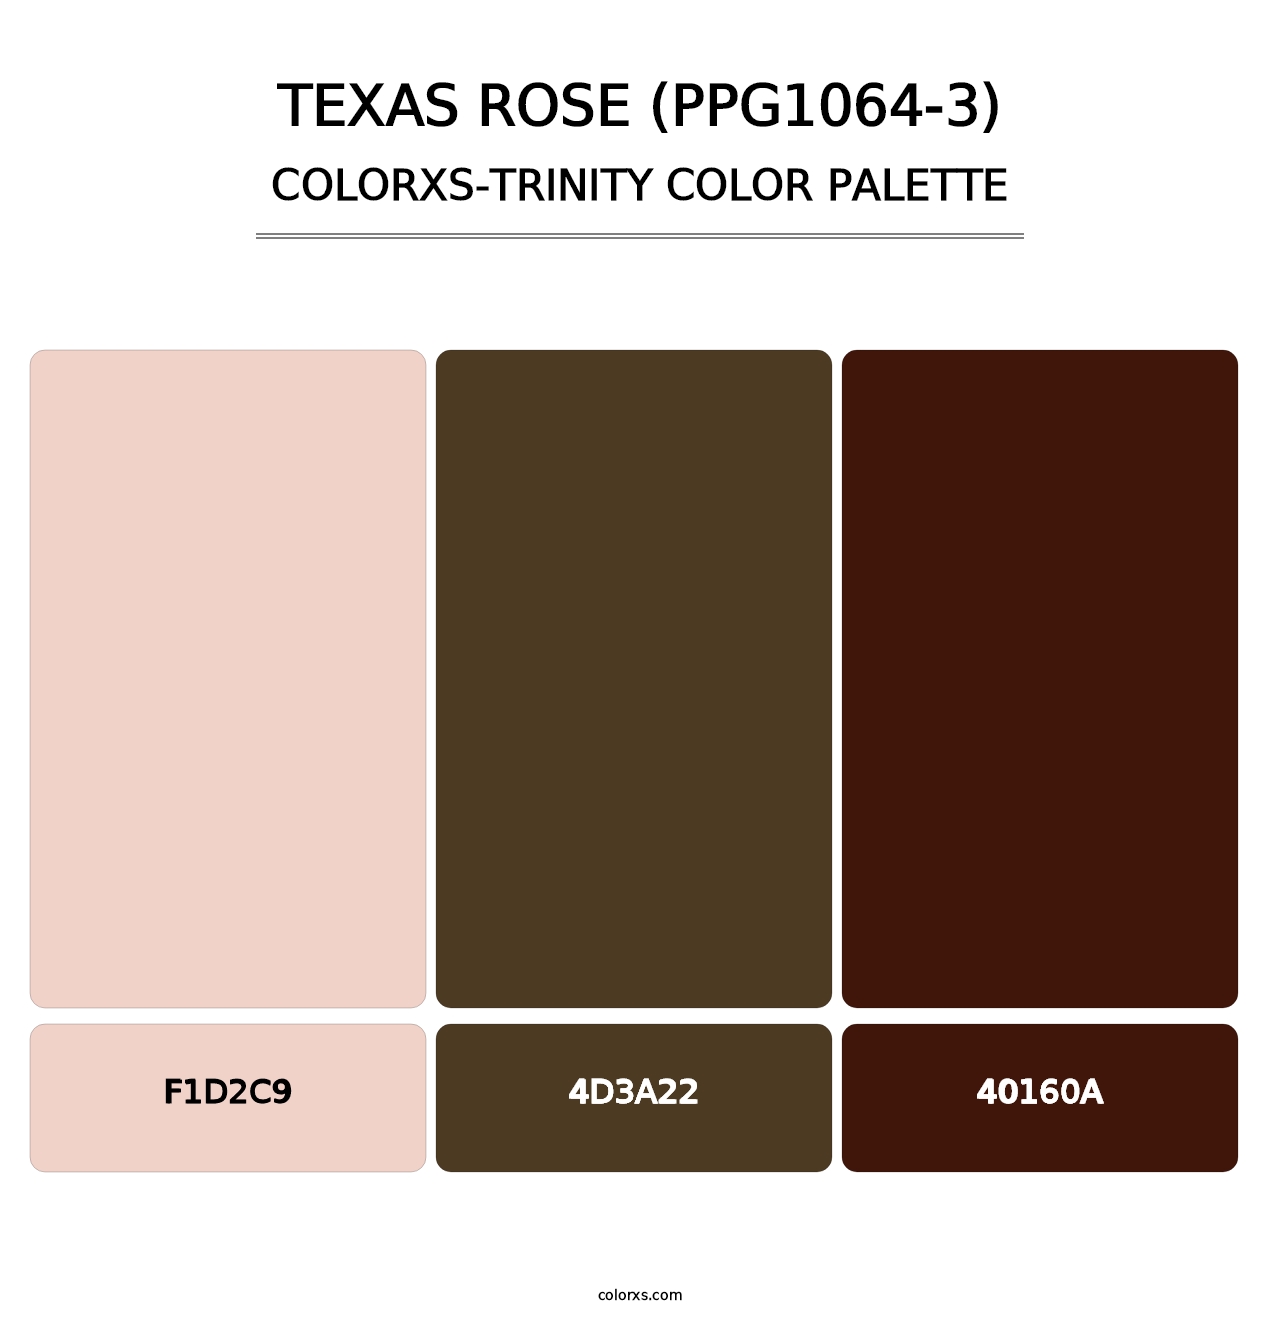 Texas Rose (PPG1064-3) - Colorxs Trinity Palette